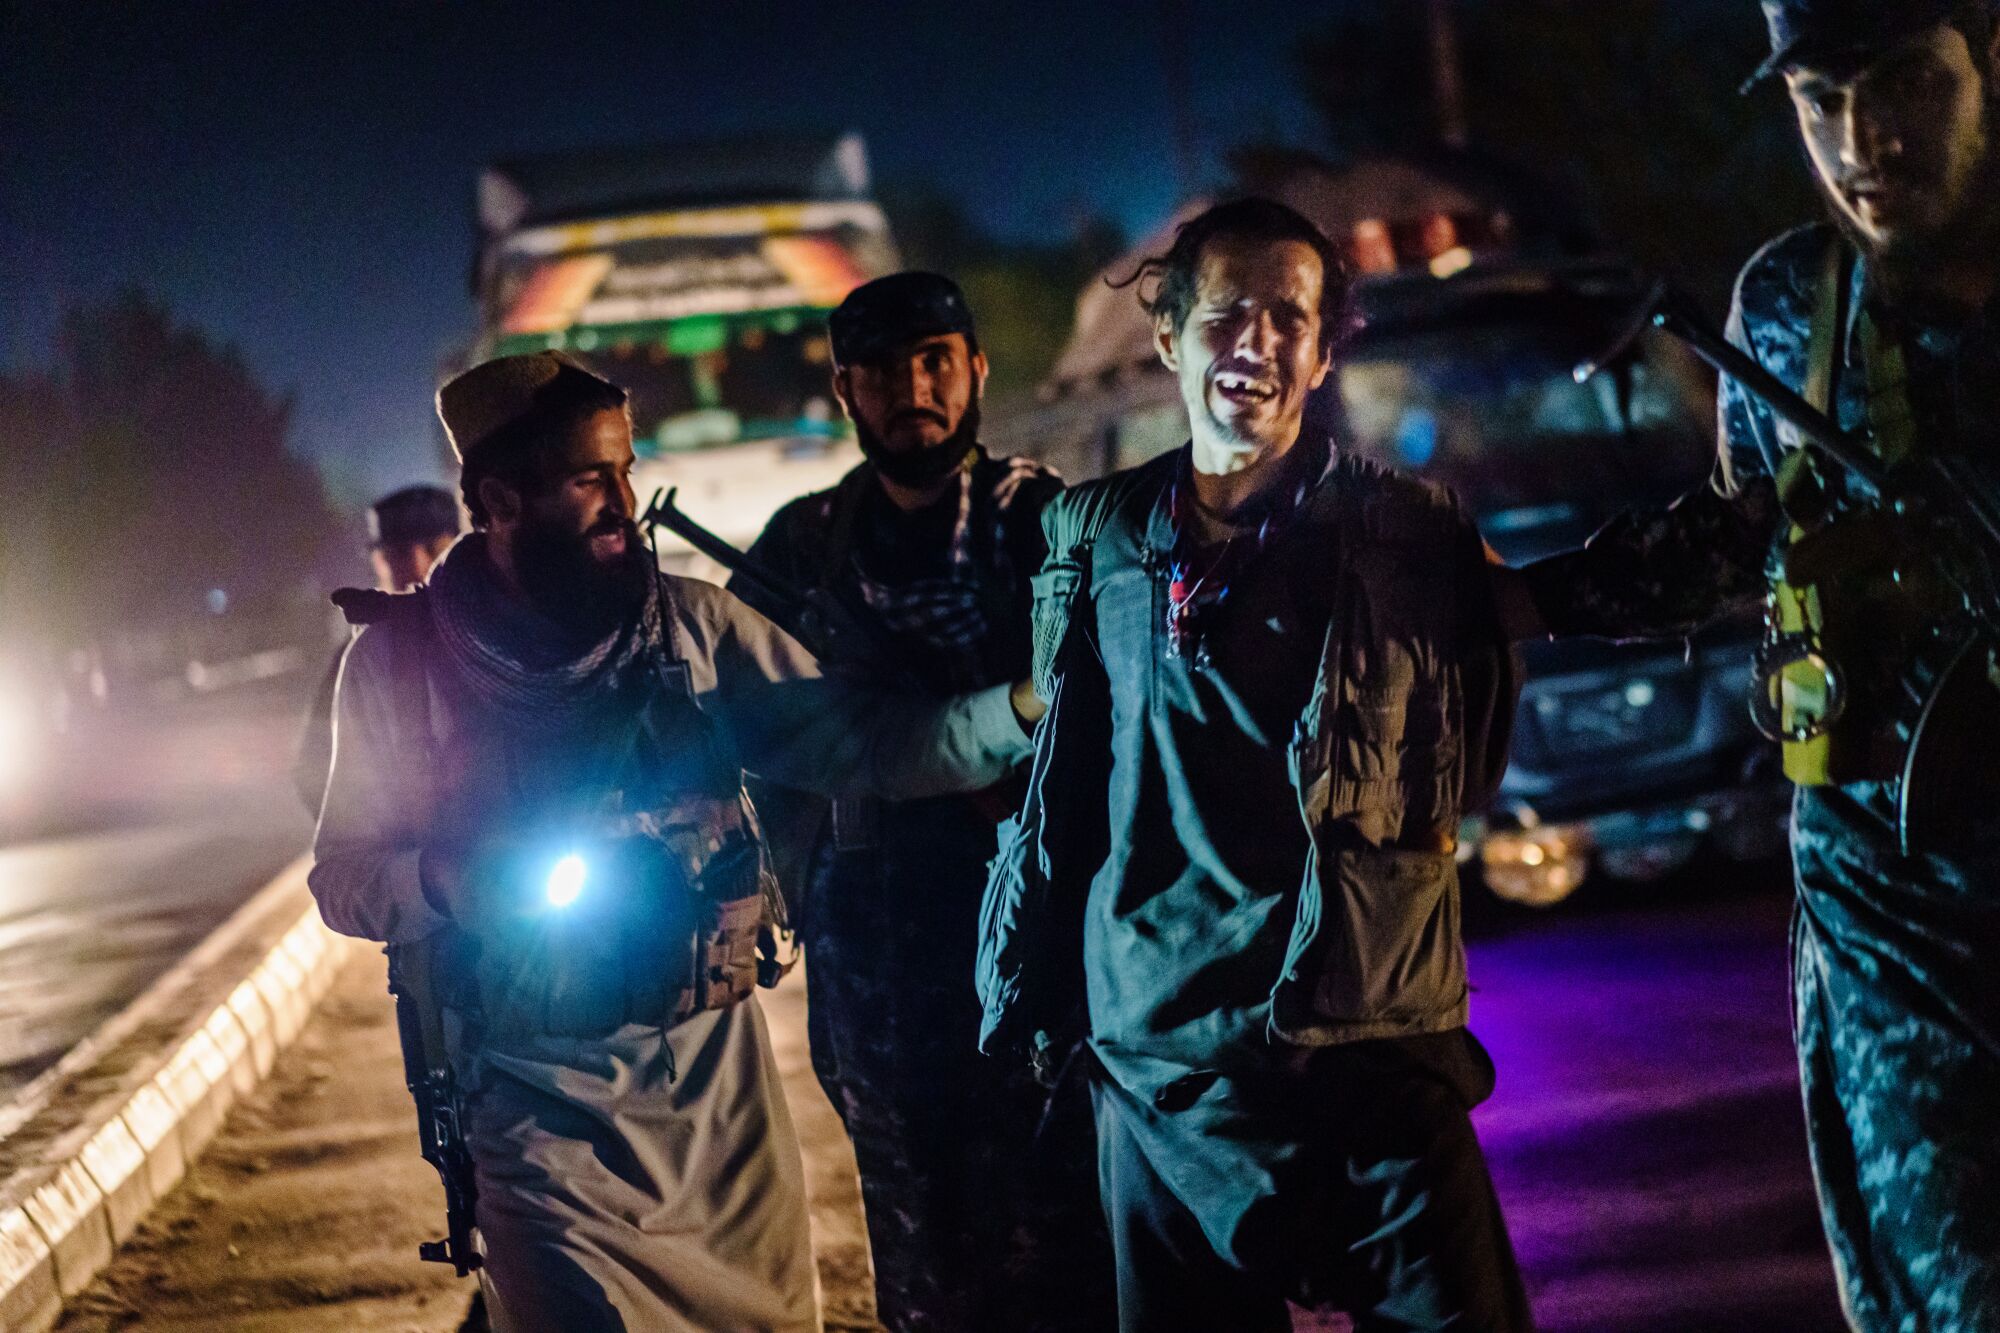 On a street at night, men with weapons pull along a crying man.